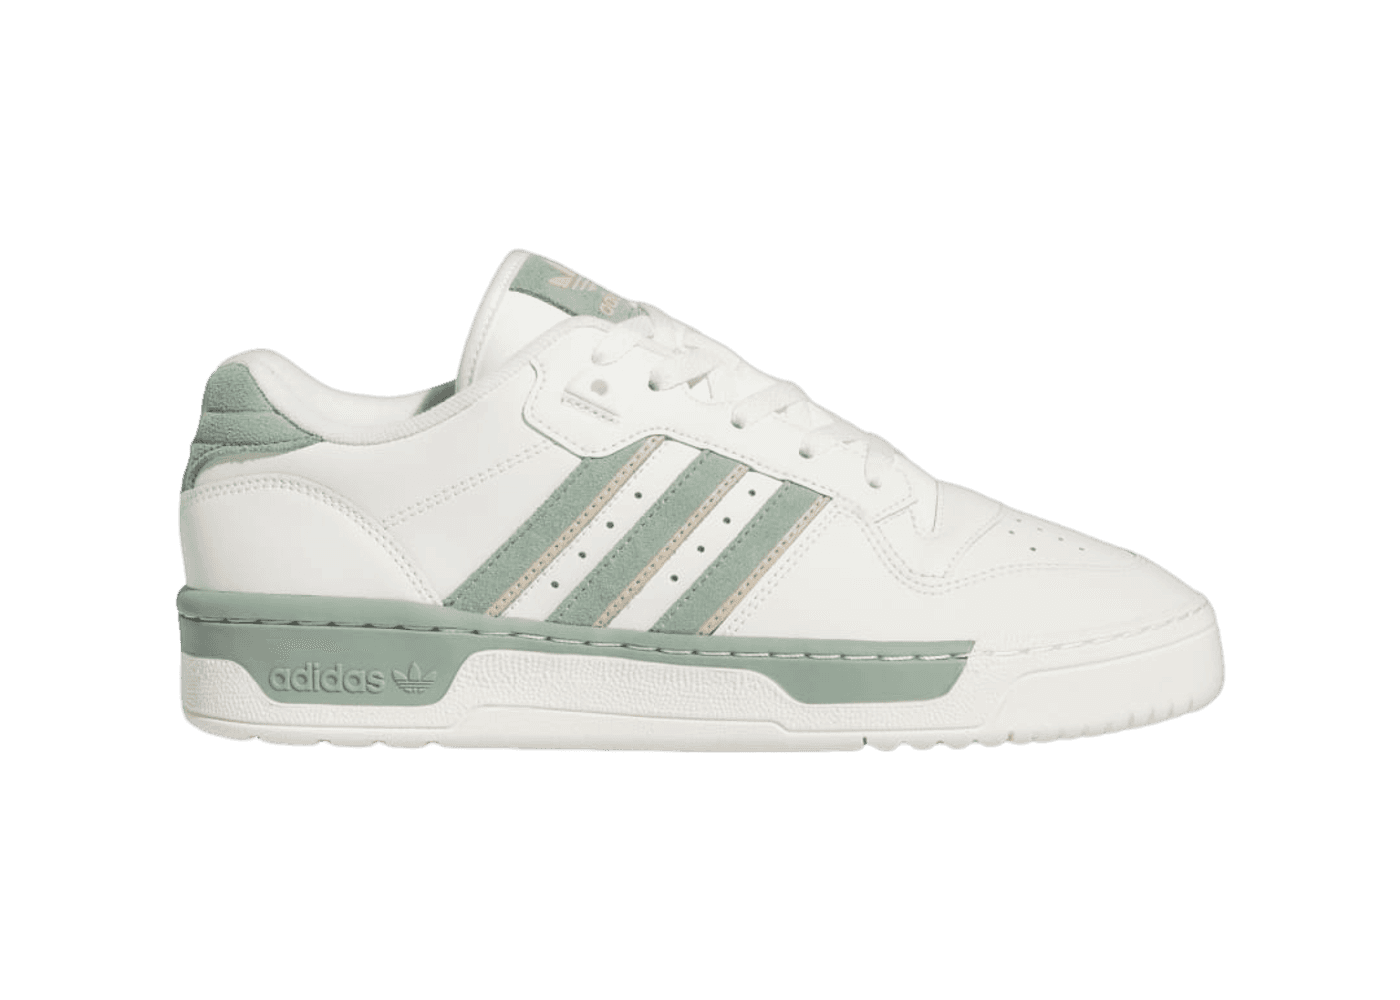 adidas Rivalry Low 'White Silver Green' - IG6309 Raffles and Release Date